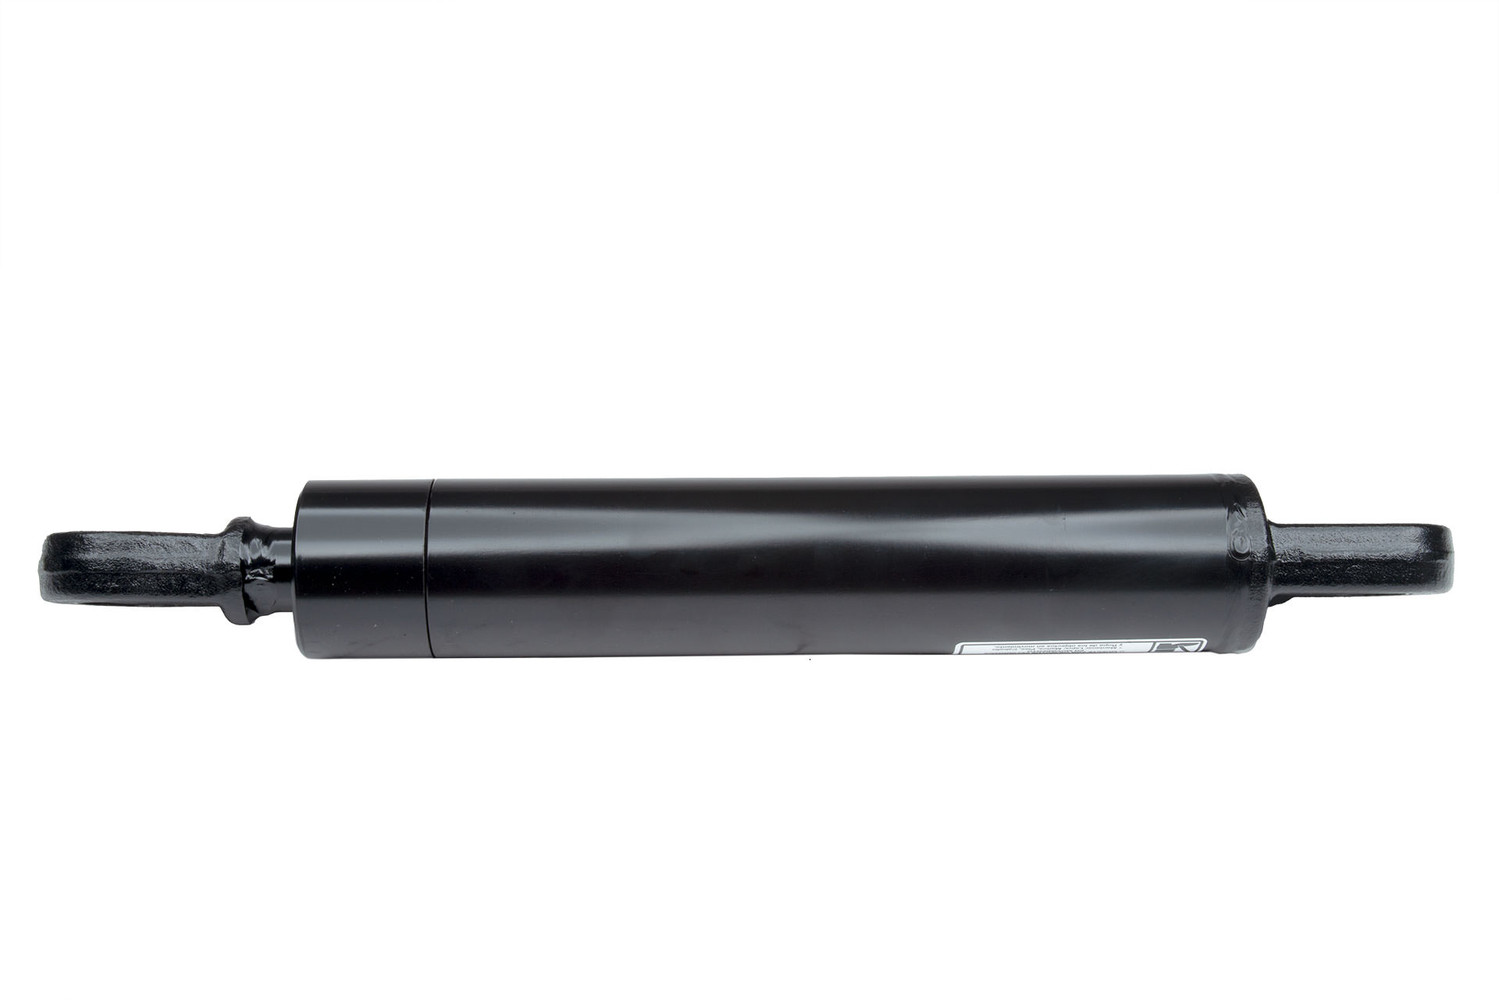 CHIEF WTG WELDED TANG HYDRAULIC CYLINDER: 2" BORE X 20" STROKE - 1.125" ROD